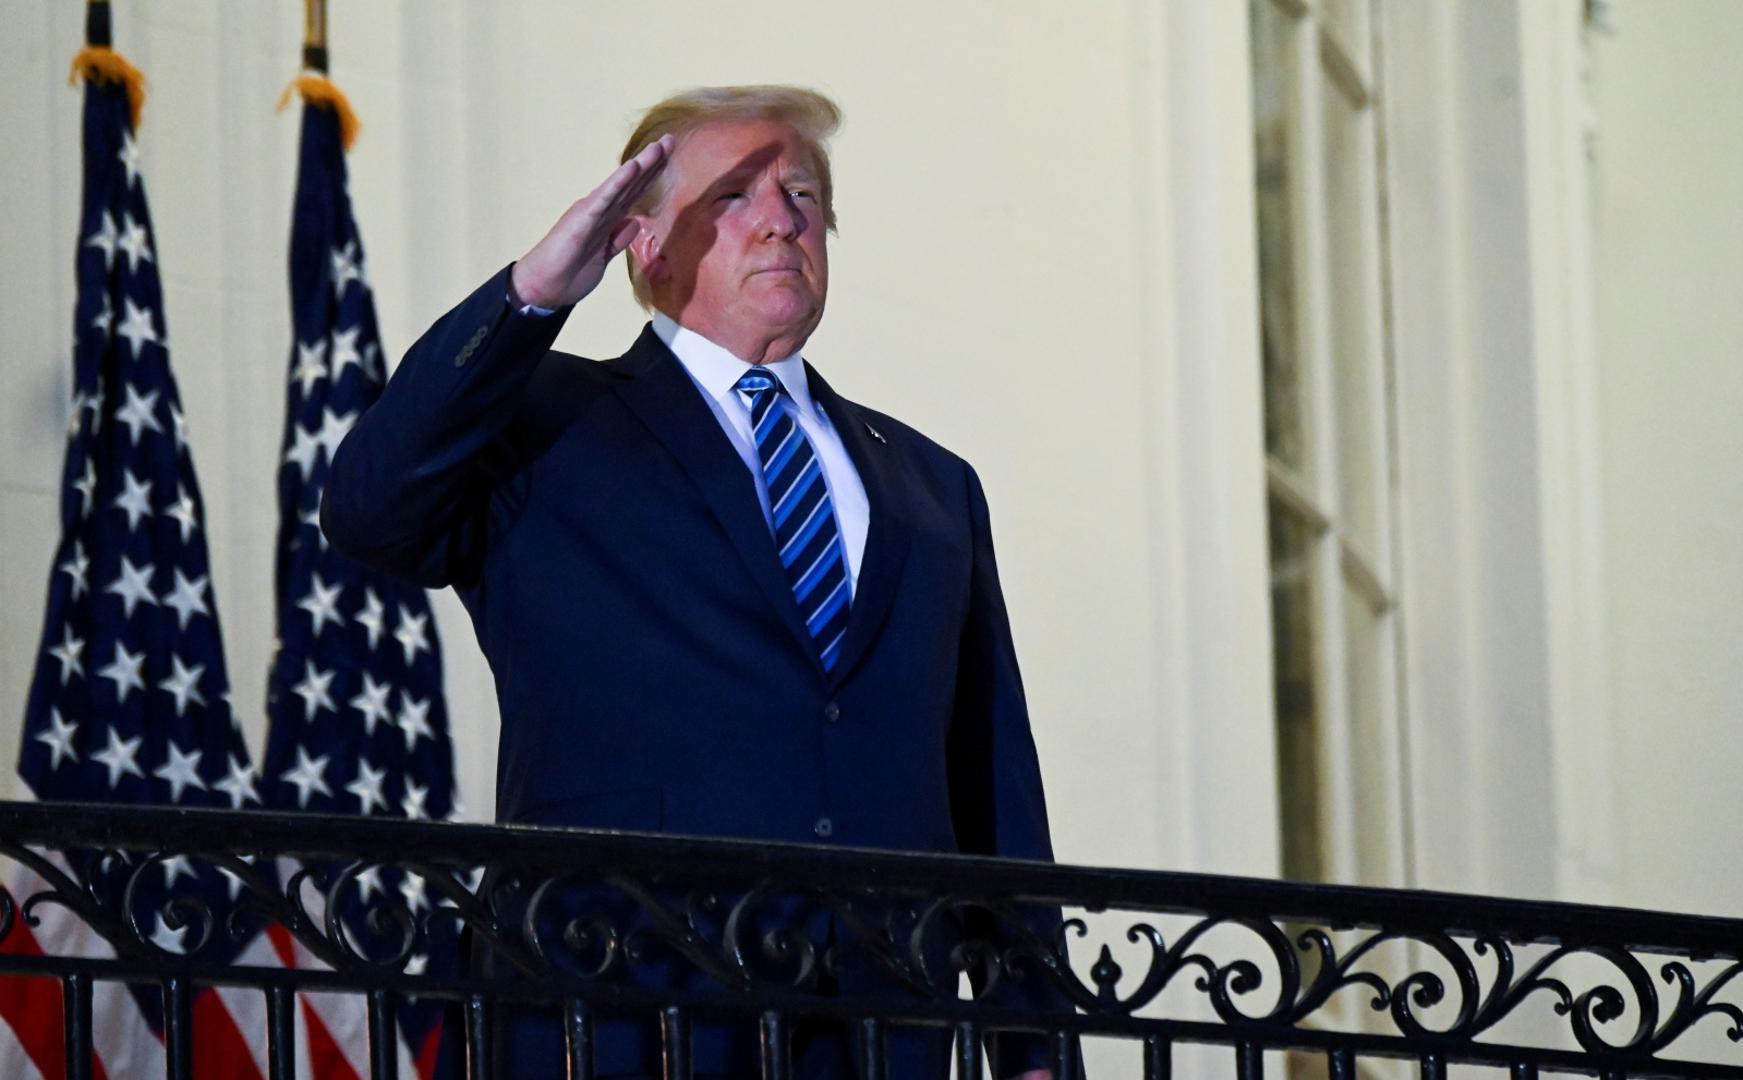 FILE PHOTO: U.S. President Donald Trump poses without face mask as he returns to the White House after being hospitalized at Walter Reed Medical Center for coronavirus disease (COVID-19), in Washington FILE PHOTO: U.S. President Donald Trump salutes as he poses without a face mask on the Truman Balcony of the White House after returning from being hospitalized at Walter Reed Medical Center for coronavirus disease (COVID-19) treatment, in Washington, U.S. October 5, 2020. REUTERS/Erin Scott/File Photo ERIN SCOTT